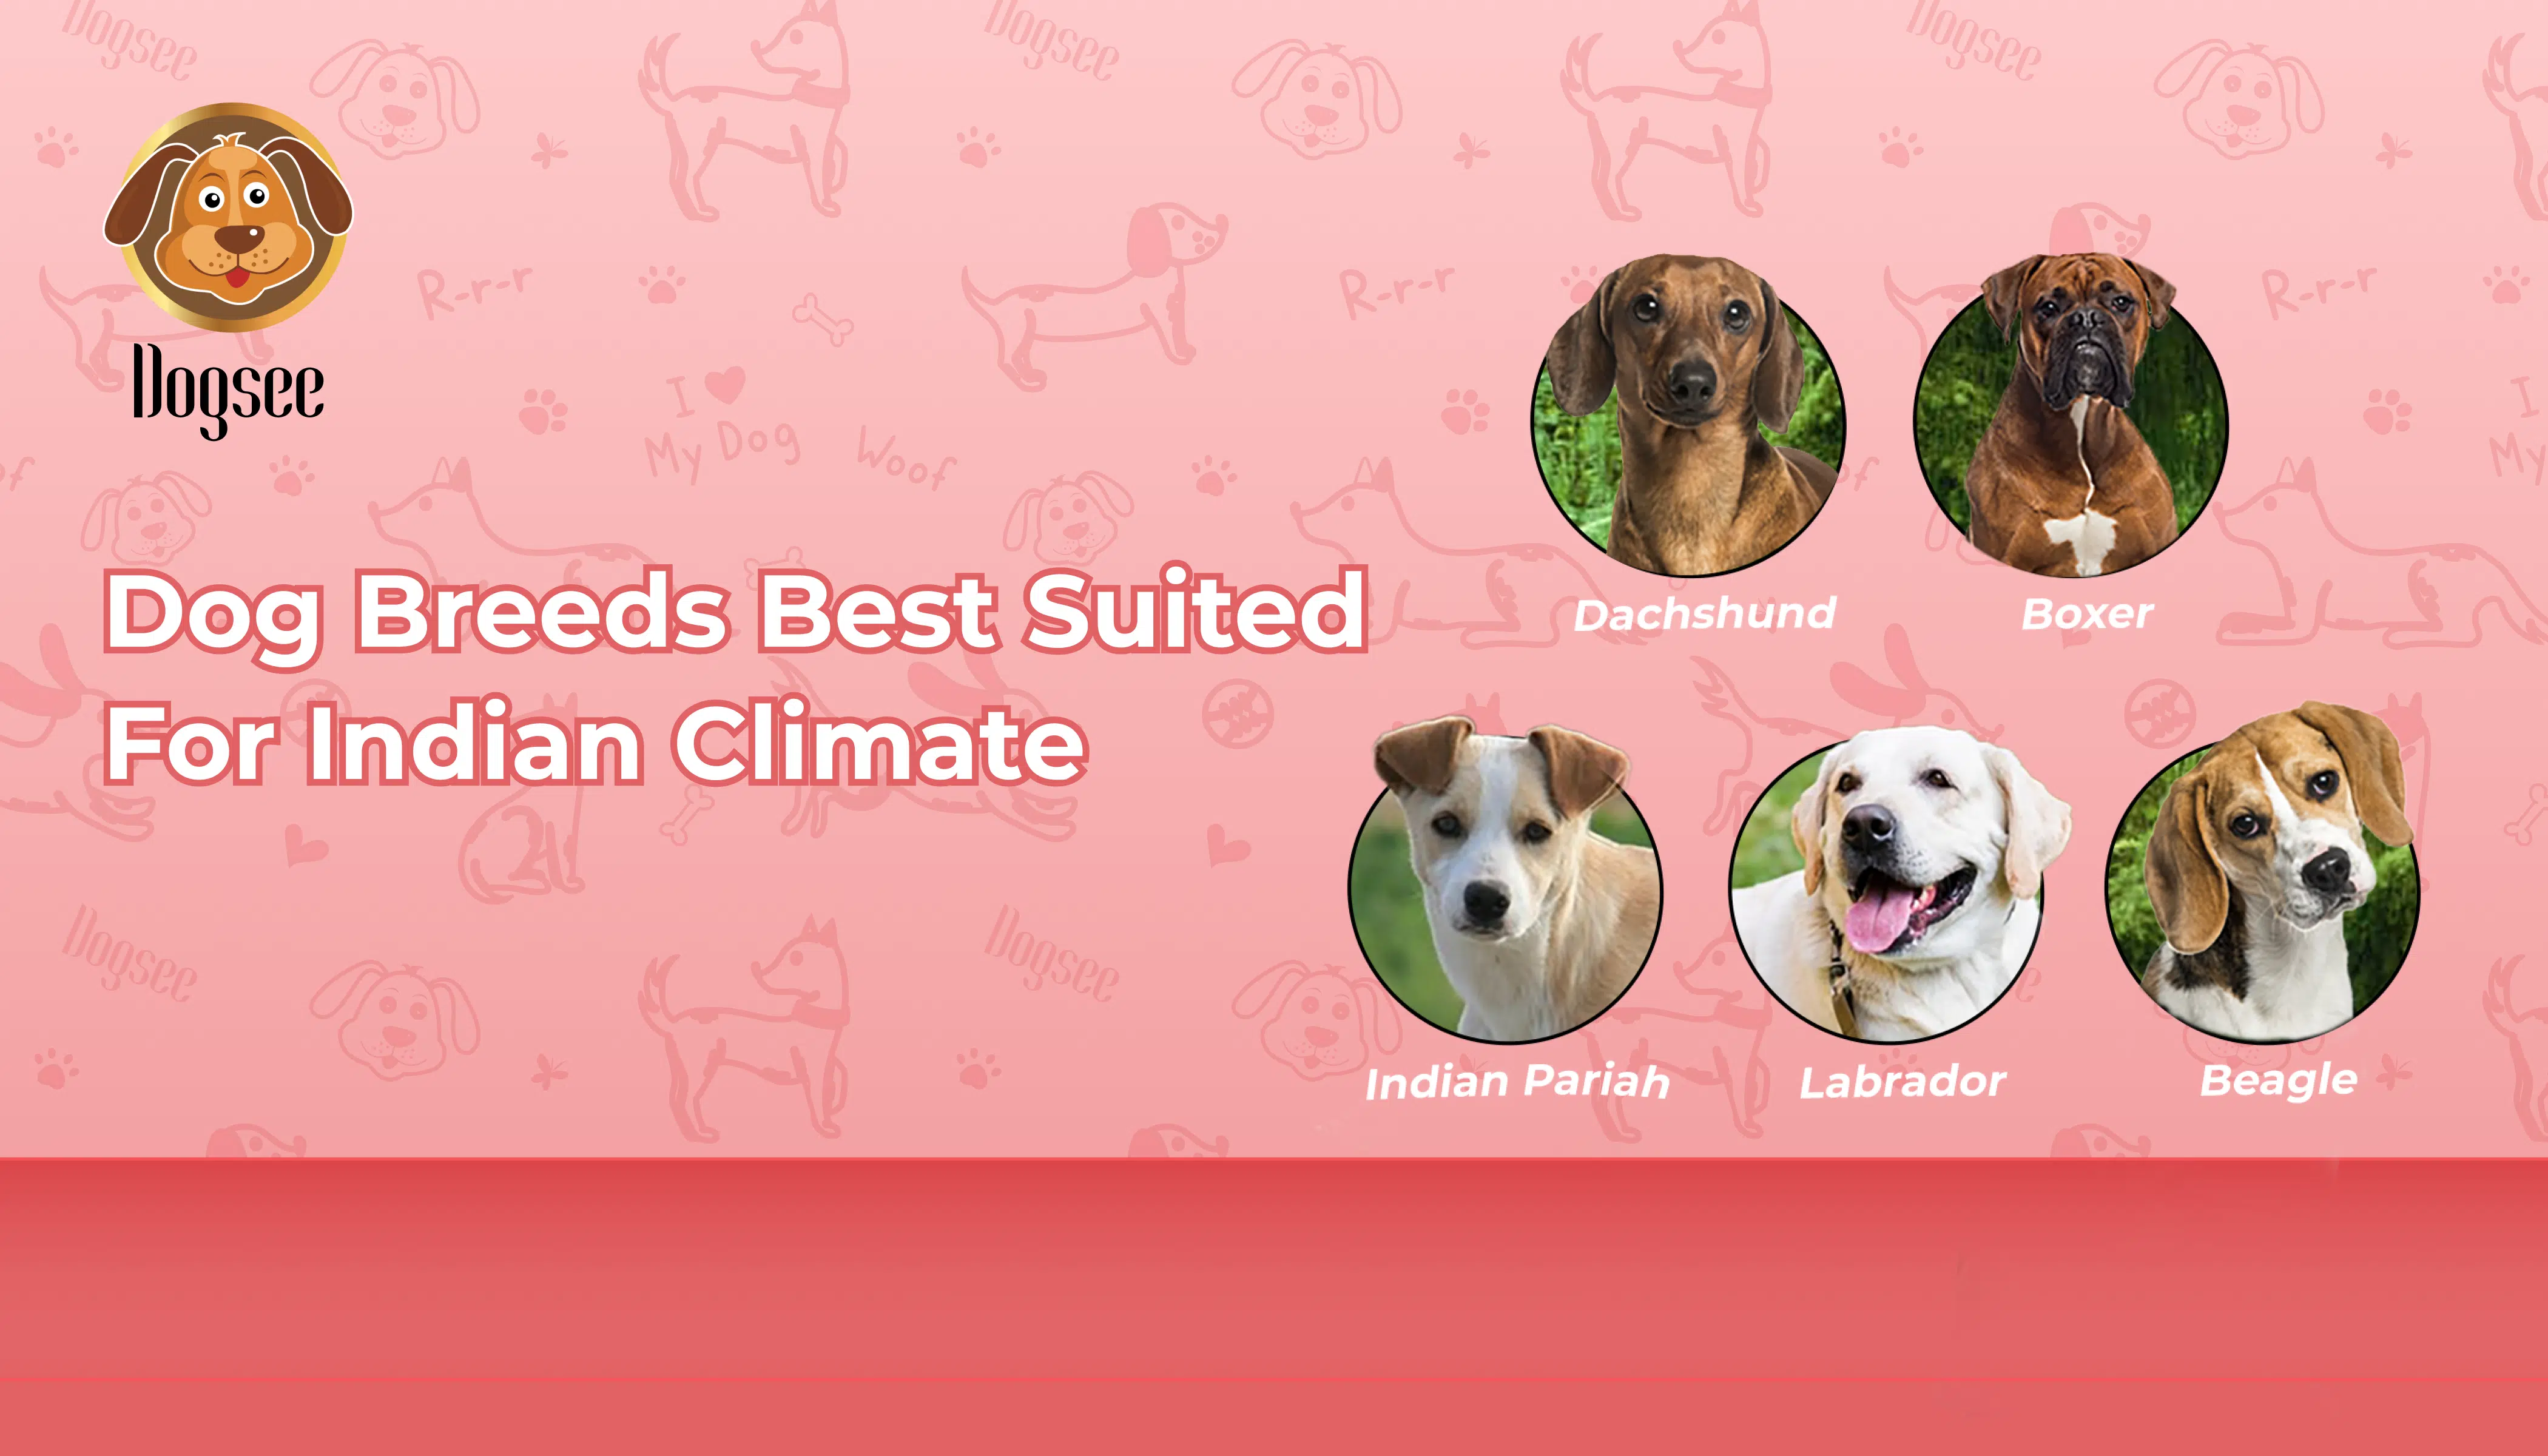 Dog Breeds Best Suited for Indian Climate